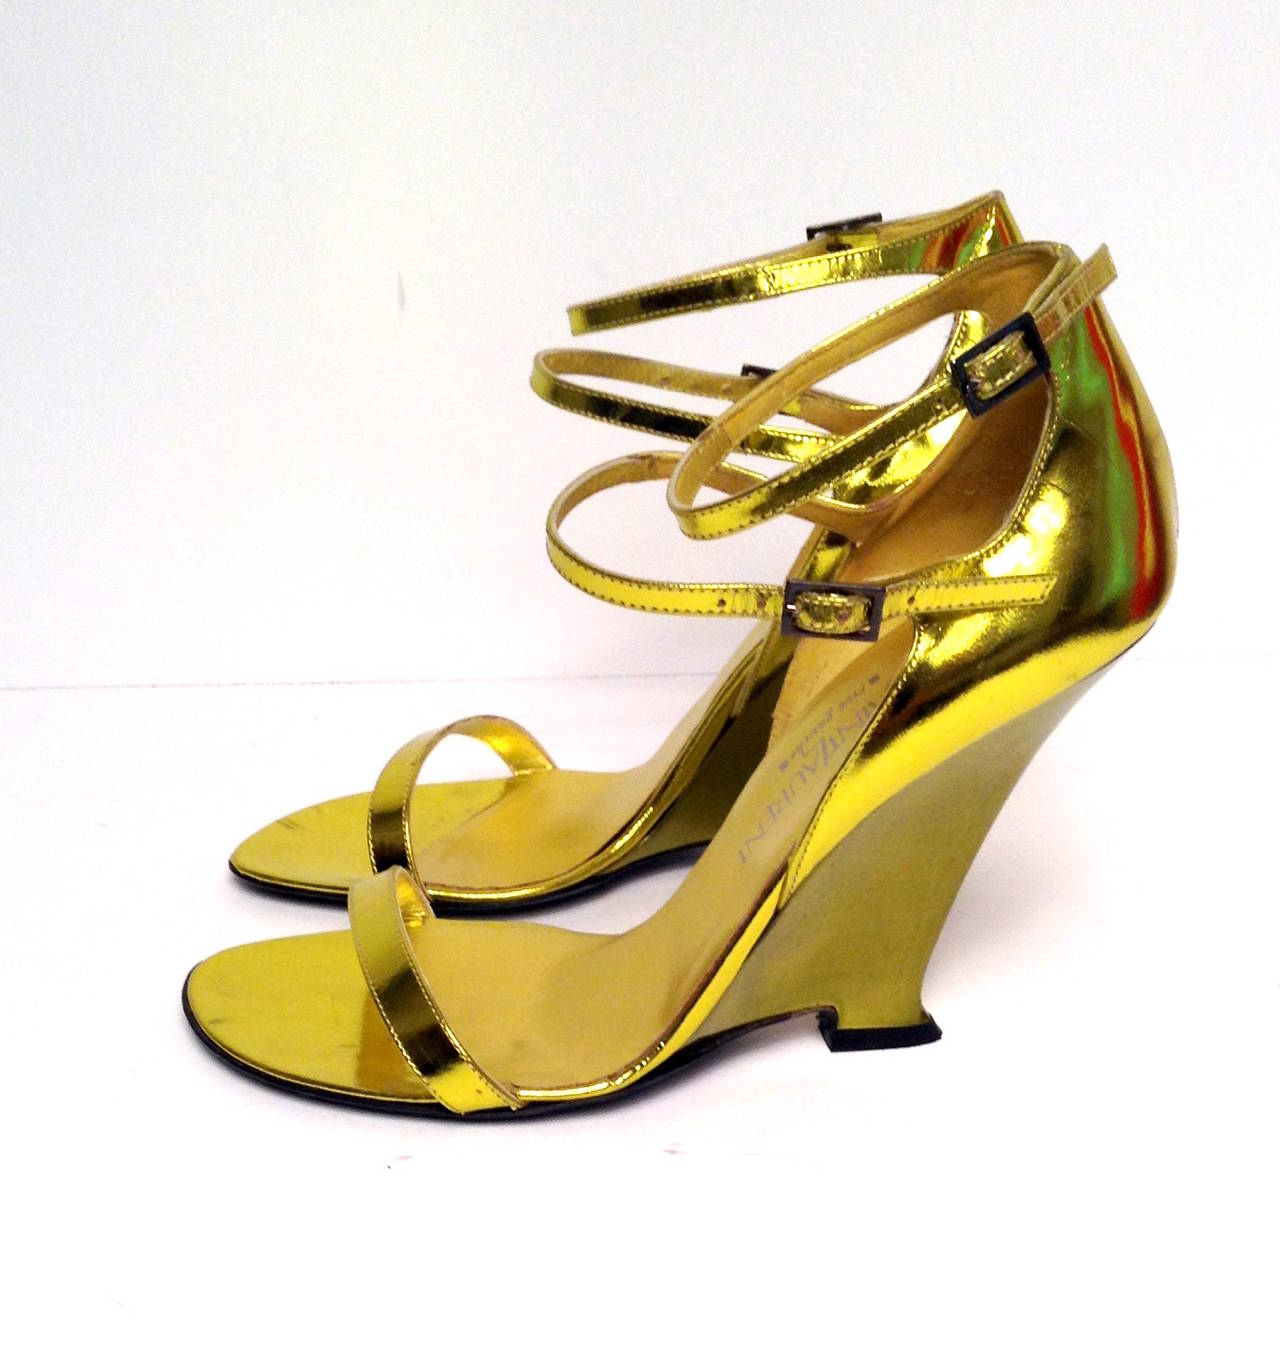 Yves Saint Laurent (Tom Ford) Iconic Gold wedges Size 38.5 For Sale 3